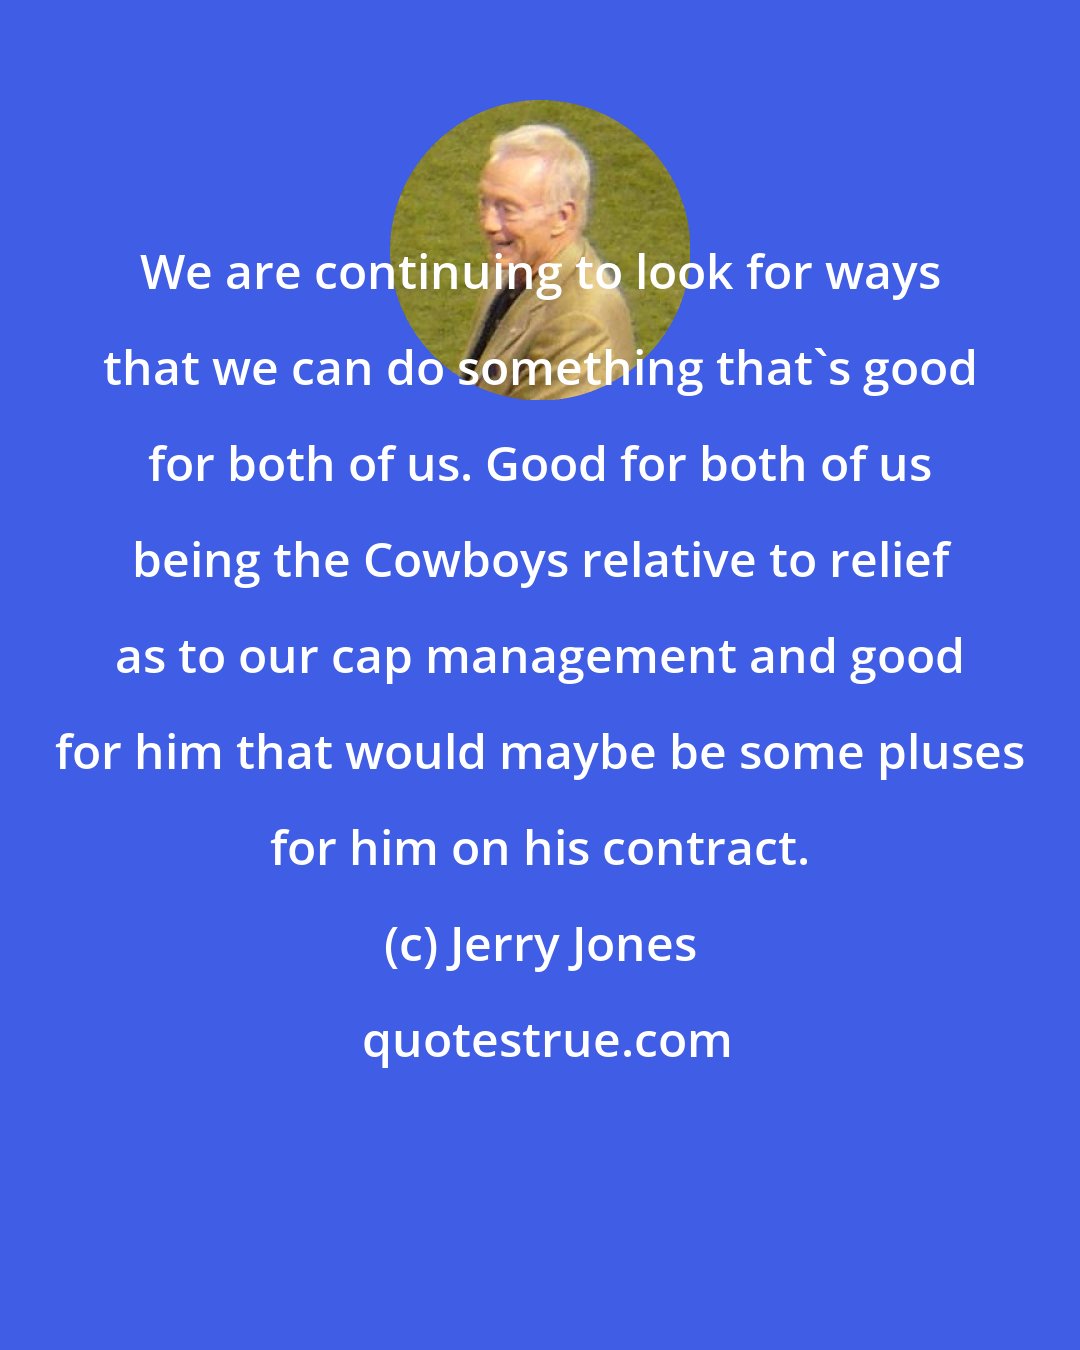 Jerry Jones: We are continuing to look for ways that we can do something that's good for both of us. Good for both of us being the Cowboys relative to relief as to our cap management and good for him that would maybe be some pluses for him on his contract.